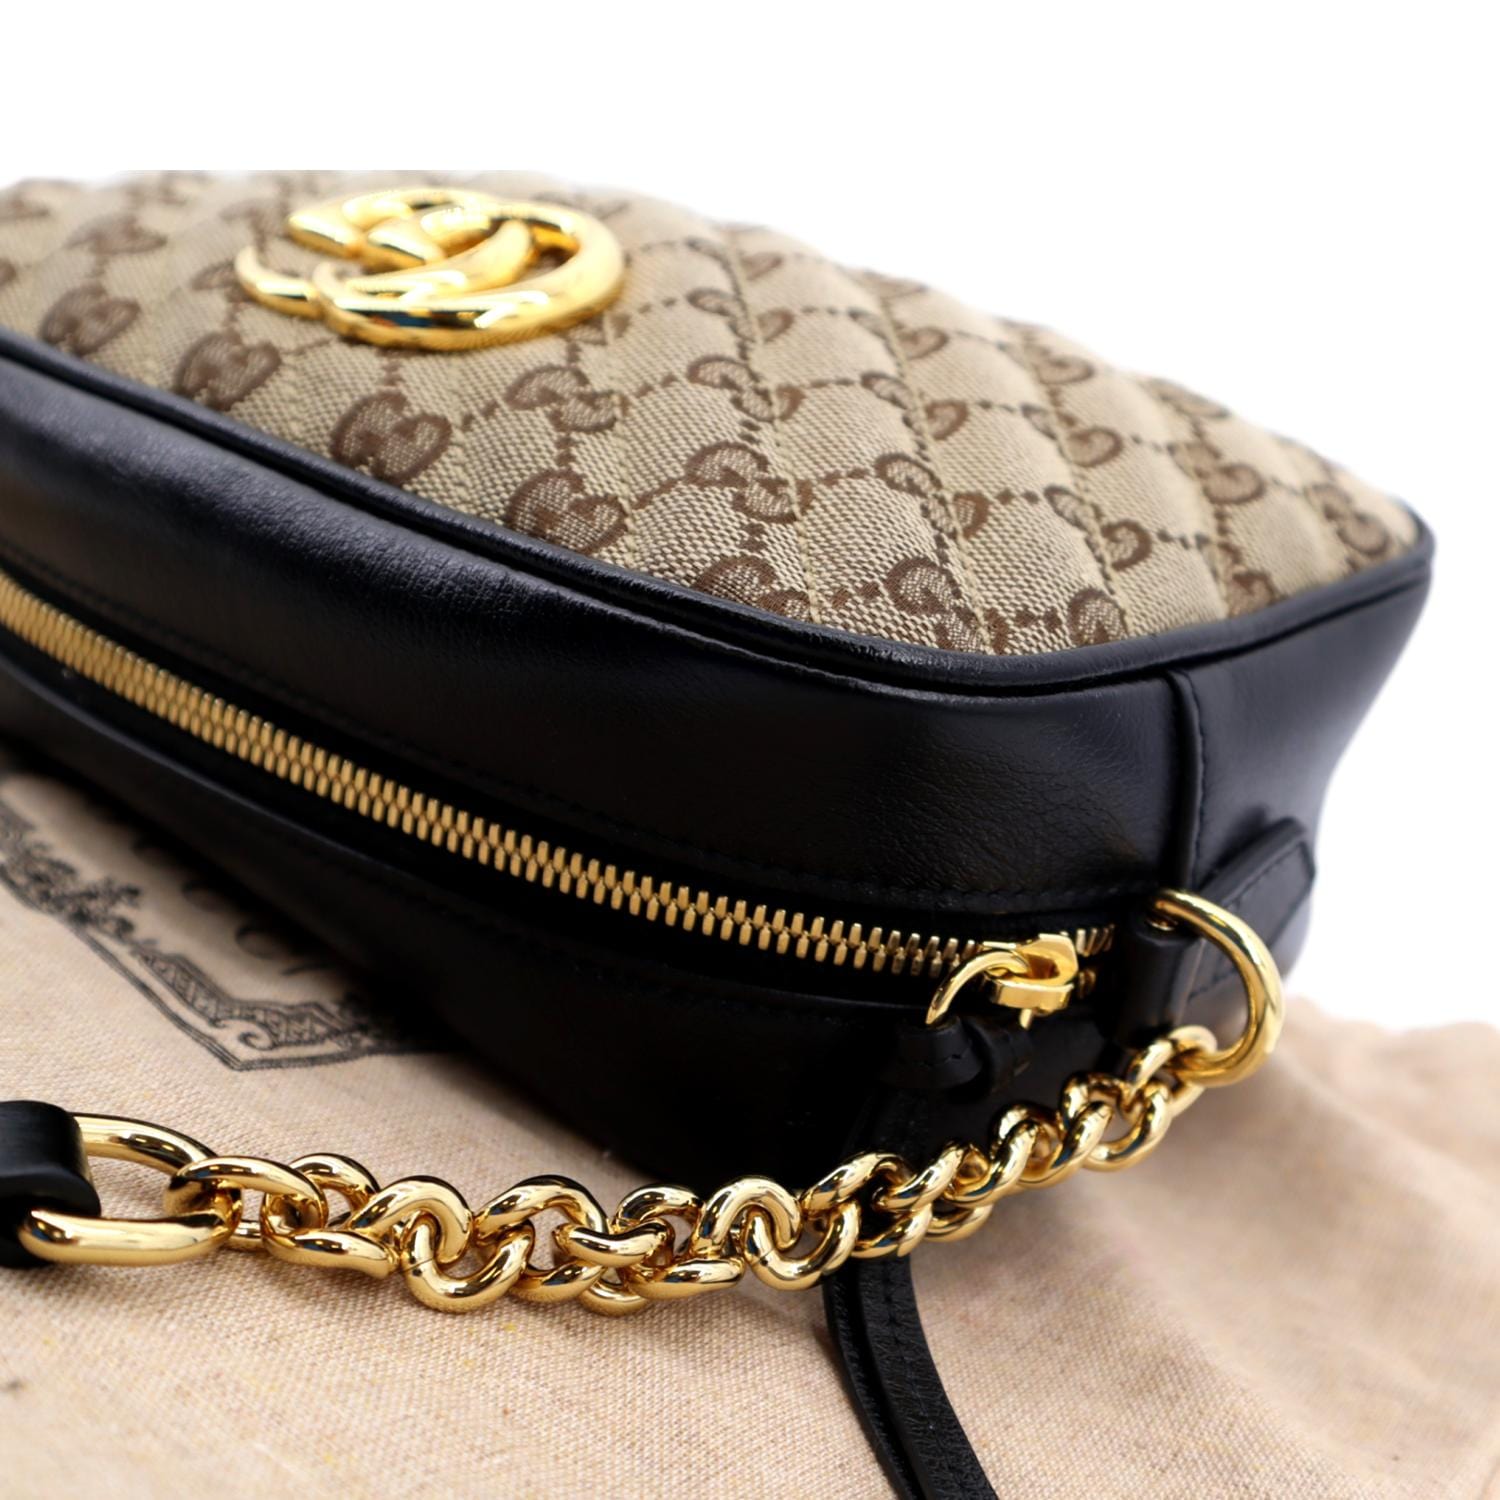 Gucci GG Marmont small shoulder bag